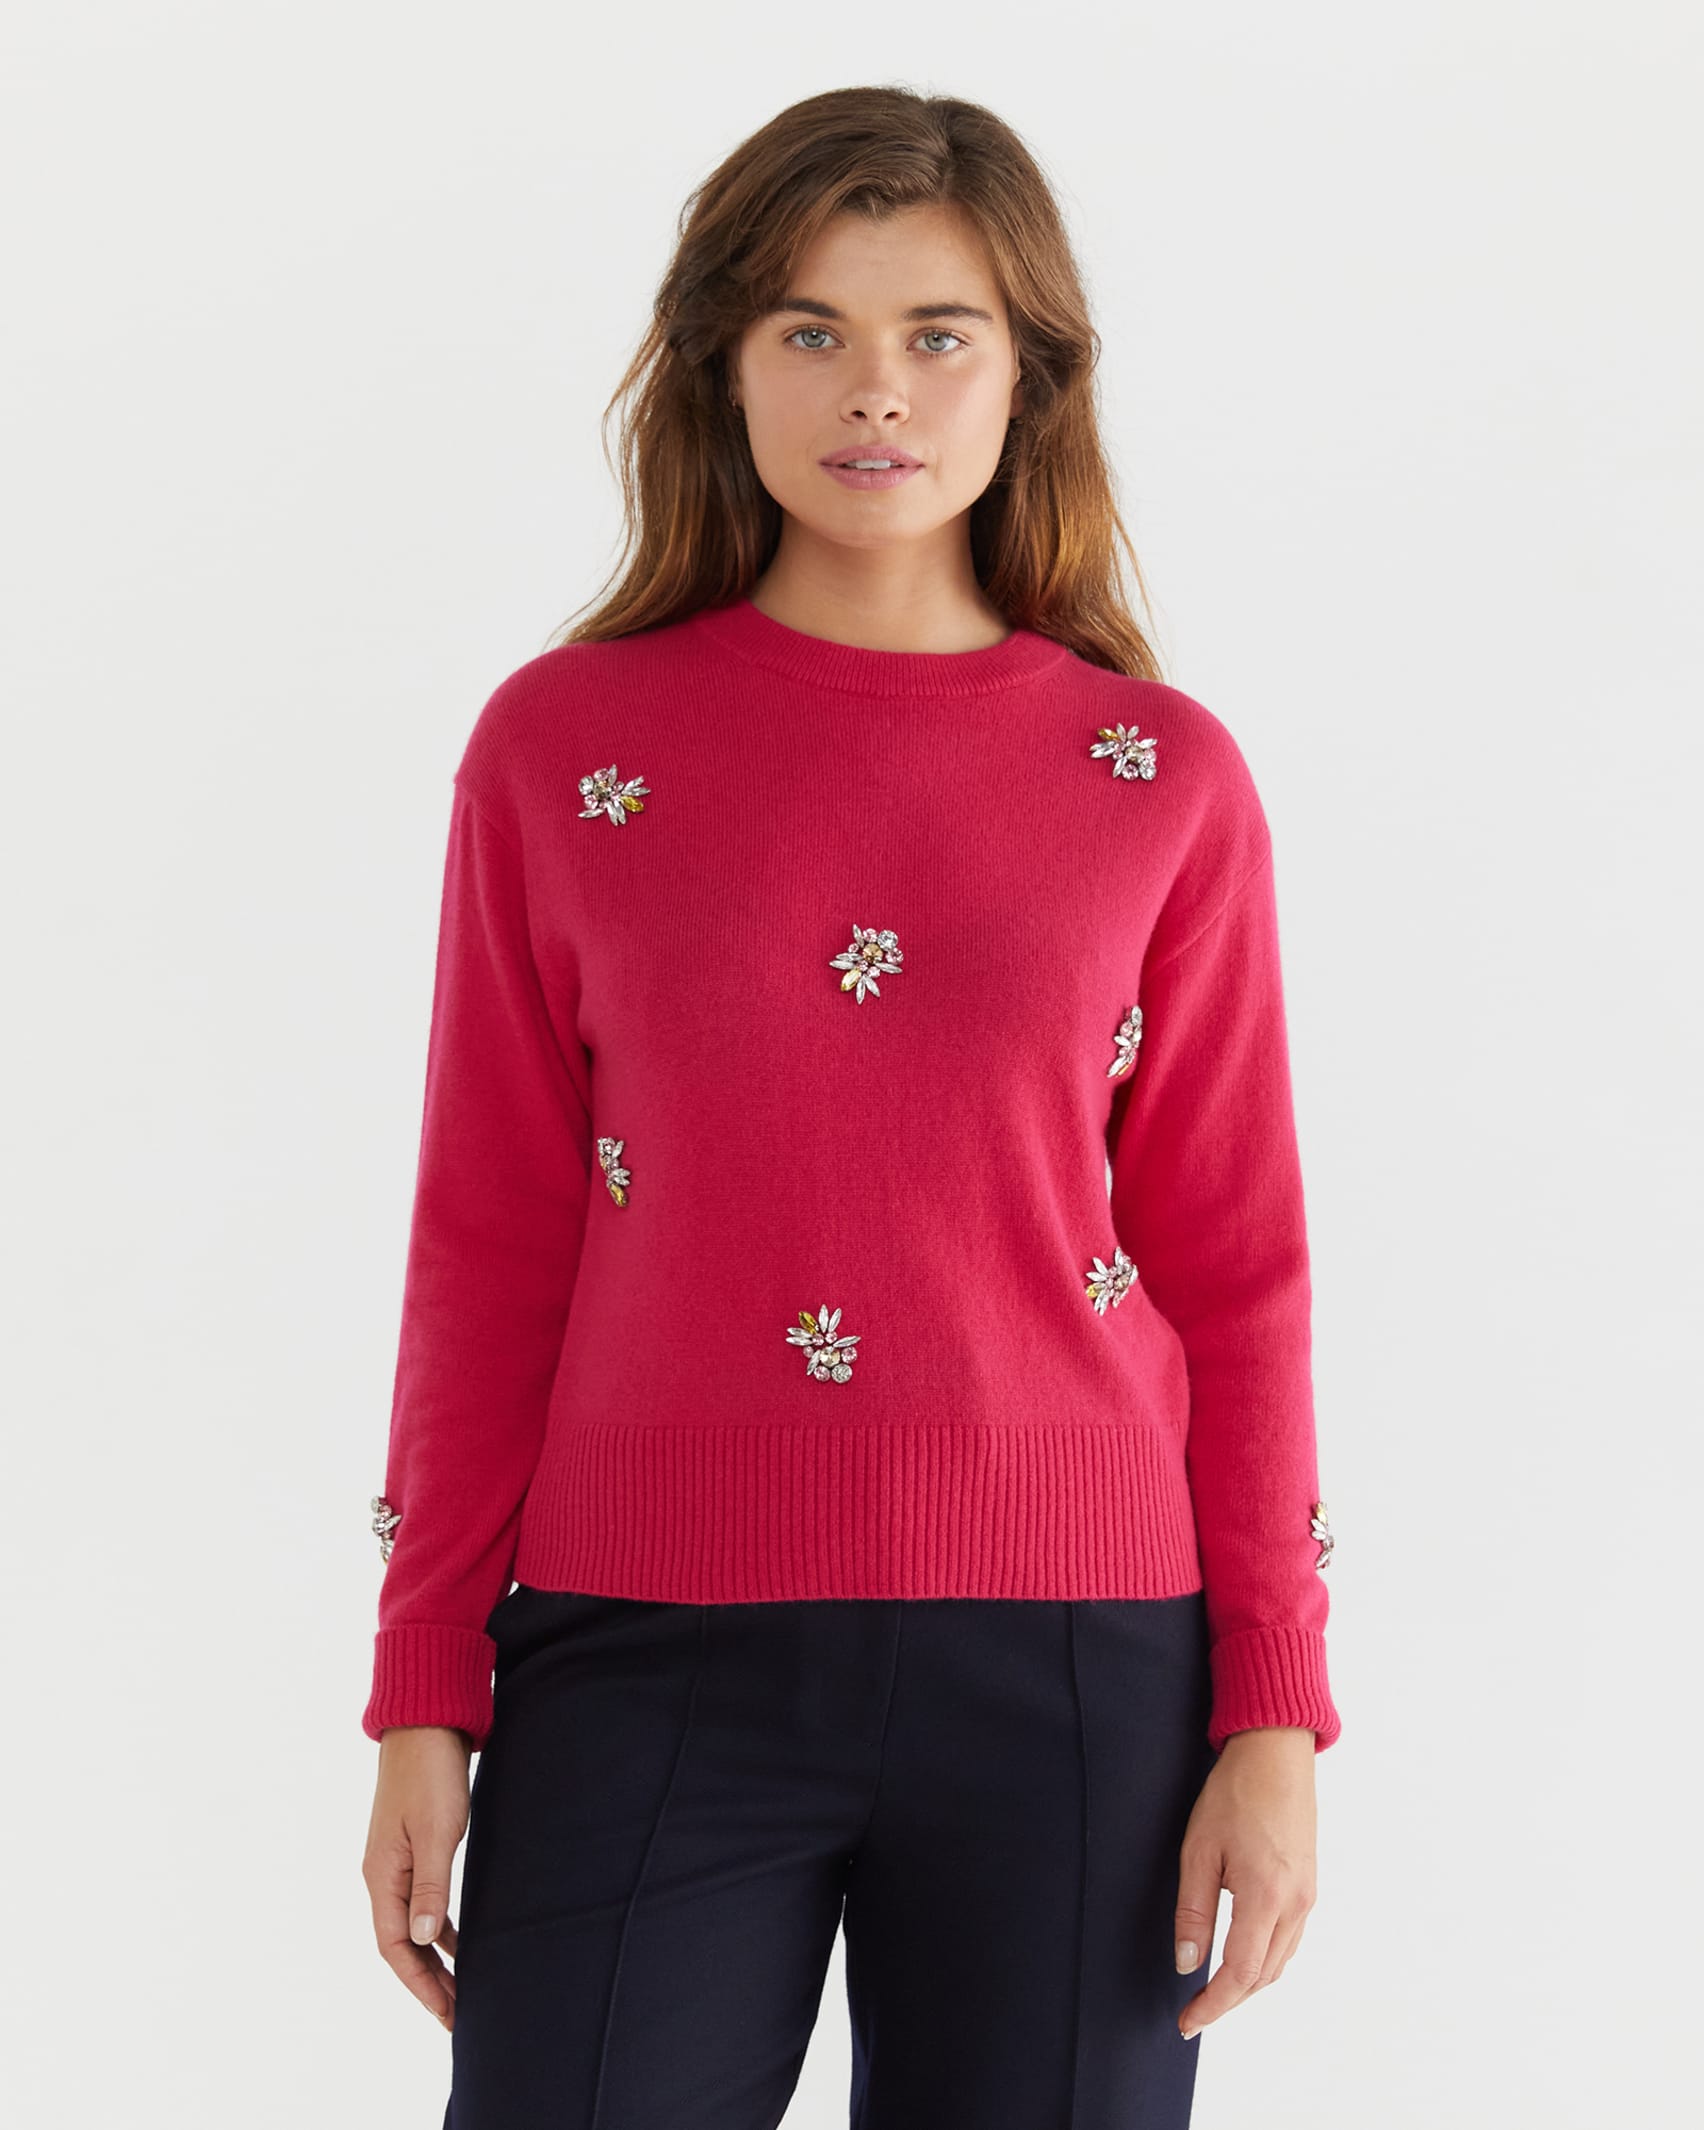 Sunshine Embellished Sweater in BRIGHT PINK